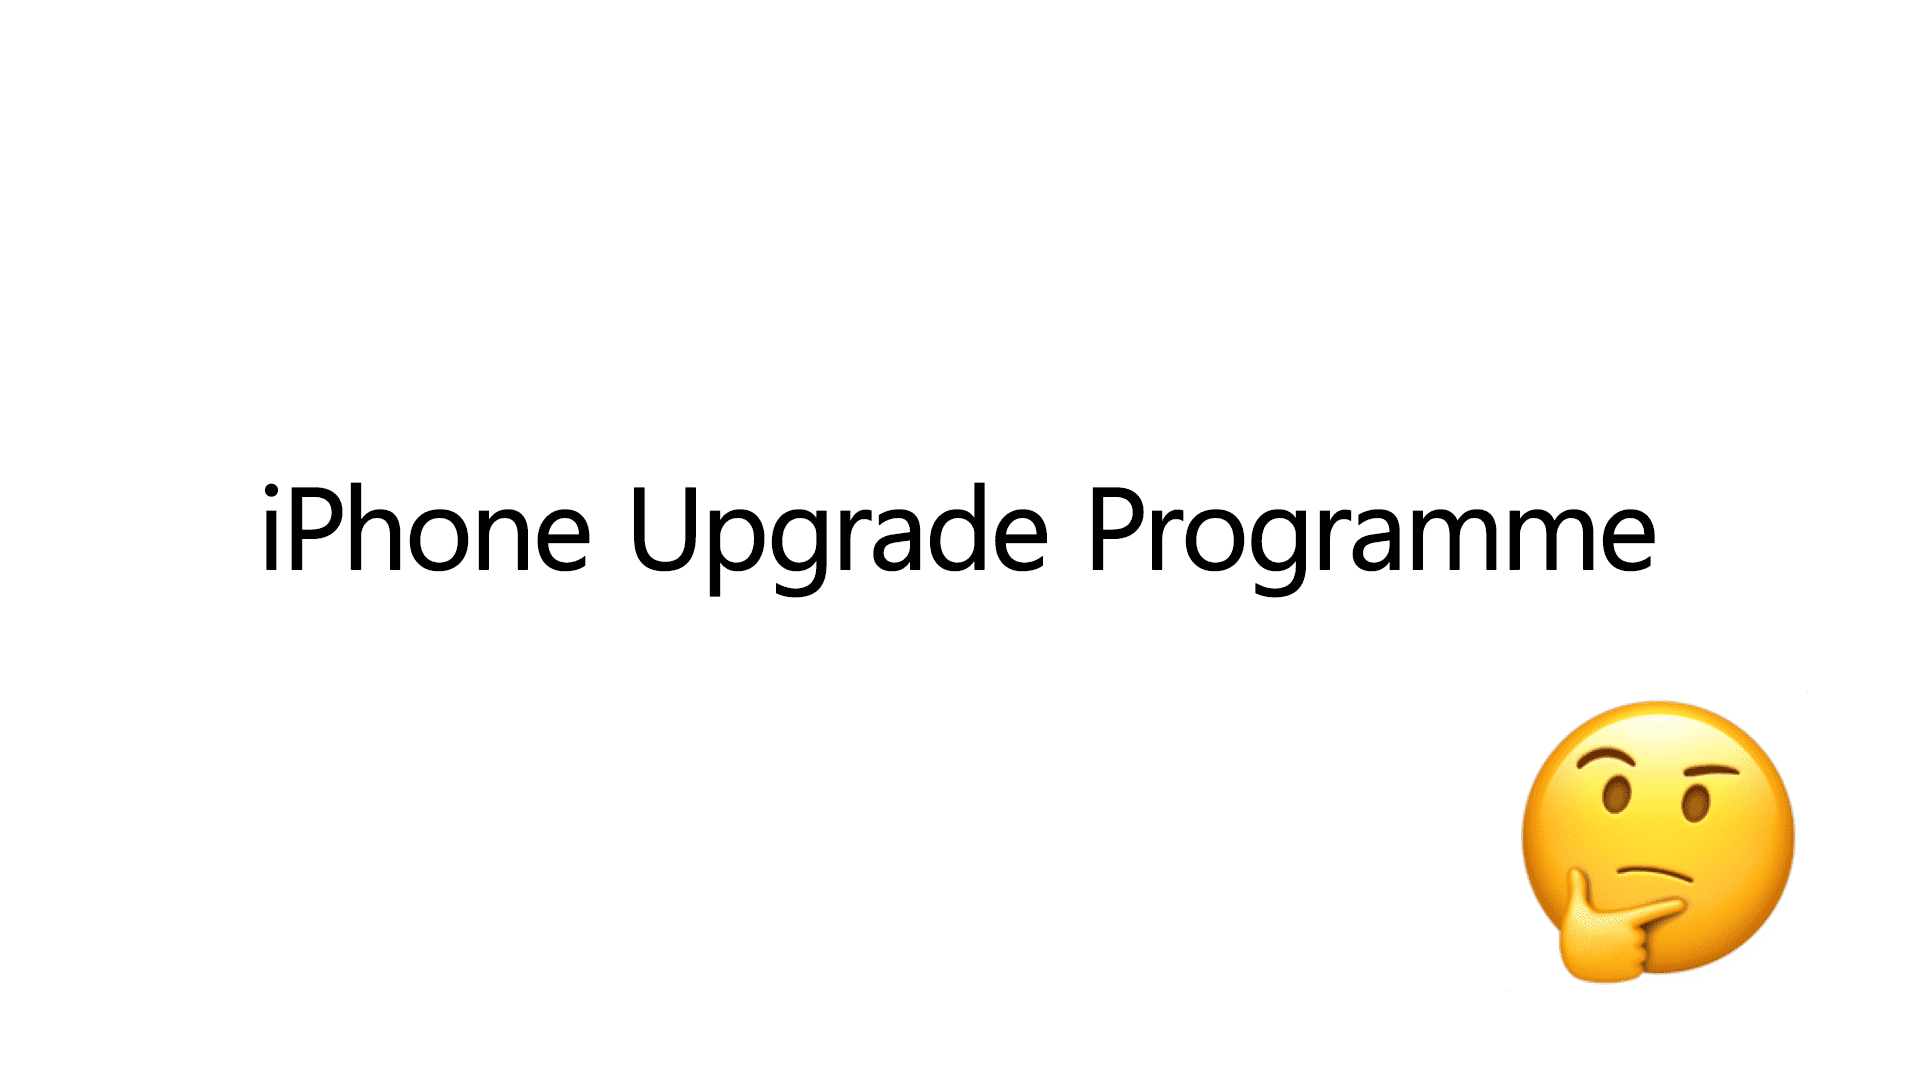 iPhone Upgrade Programme in 2020 - is it worth it?